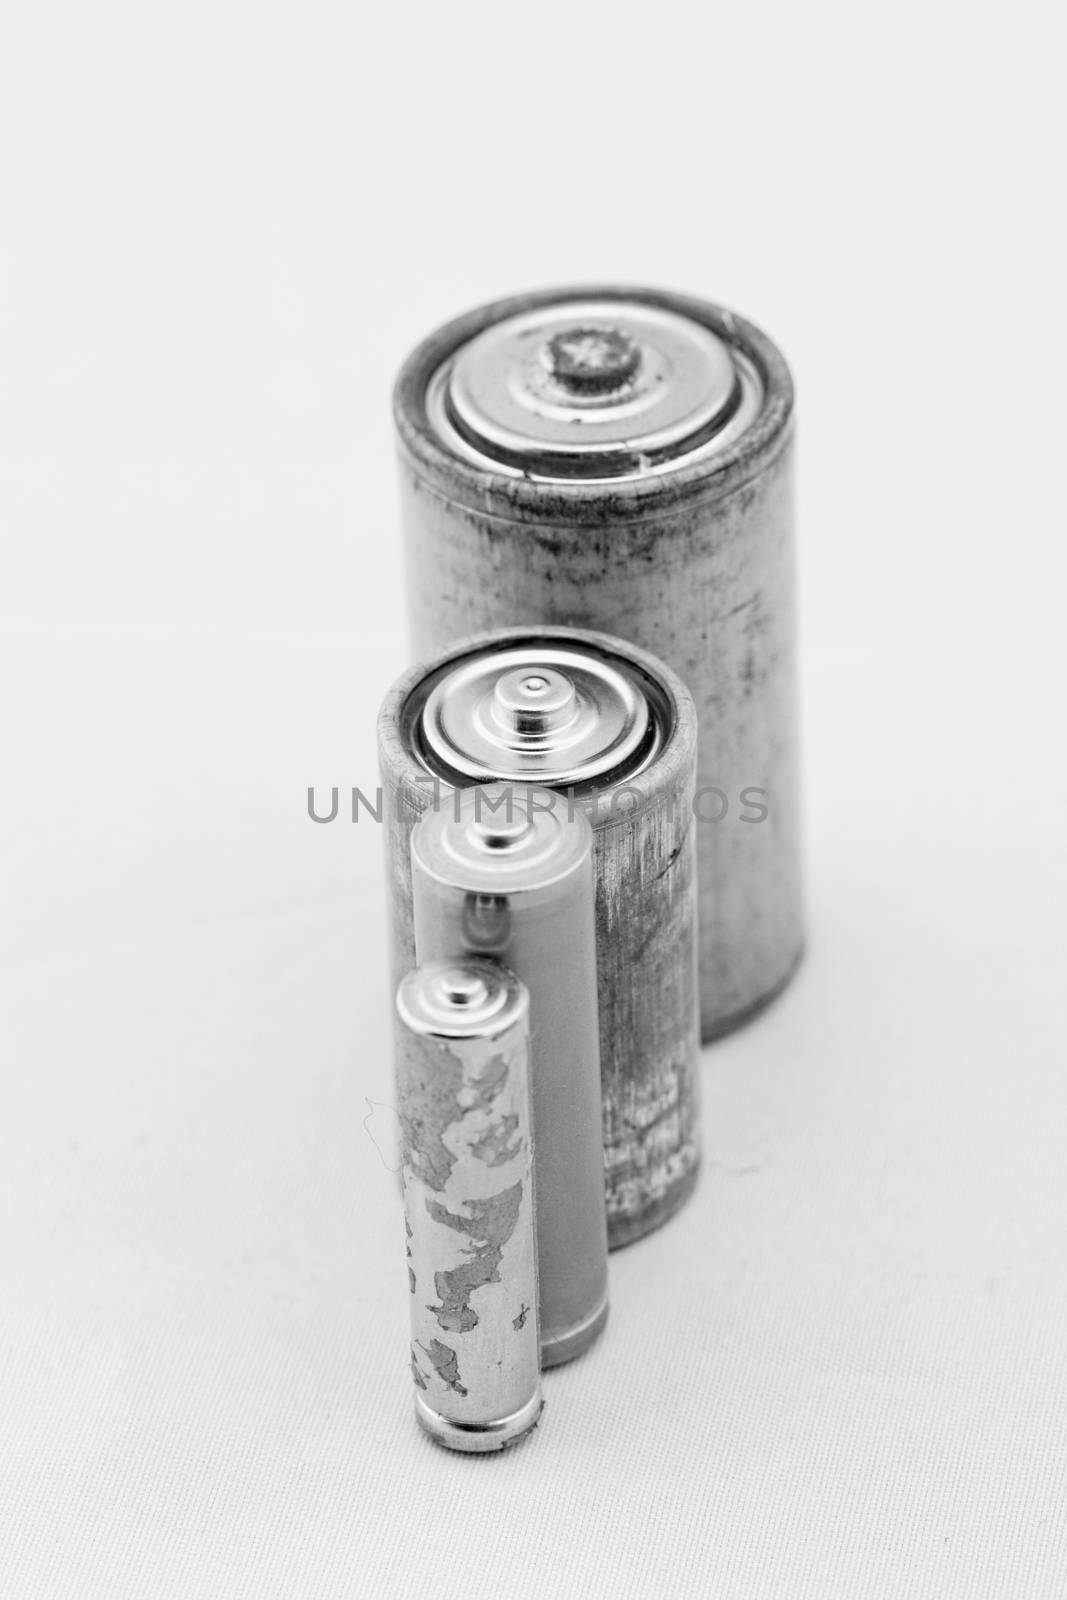 Old grey batteries on white background (aa, aaa, b, c)